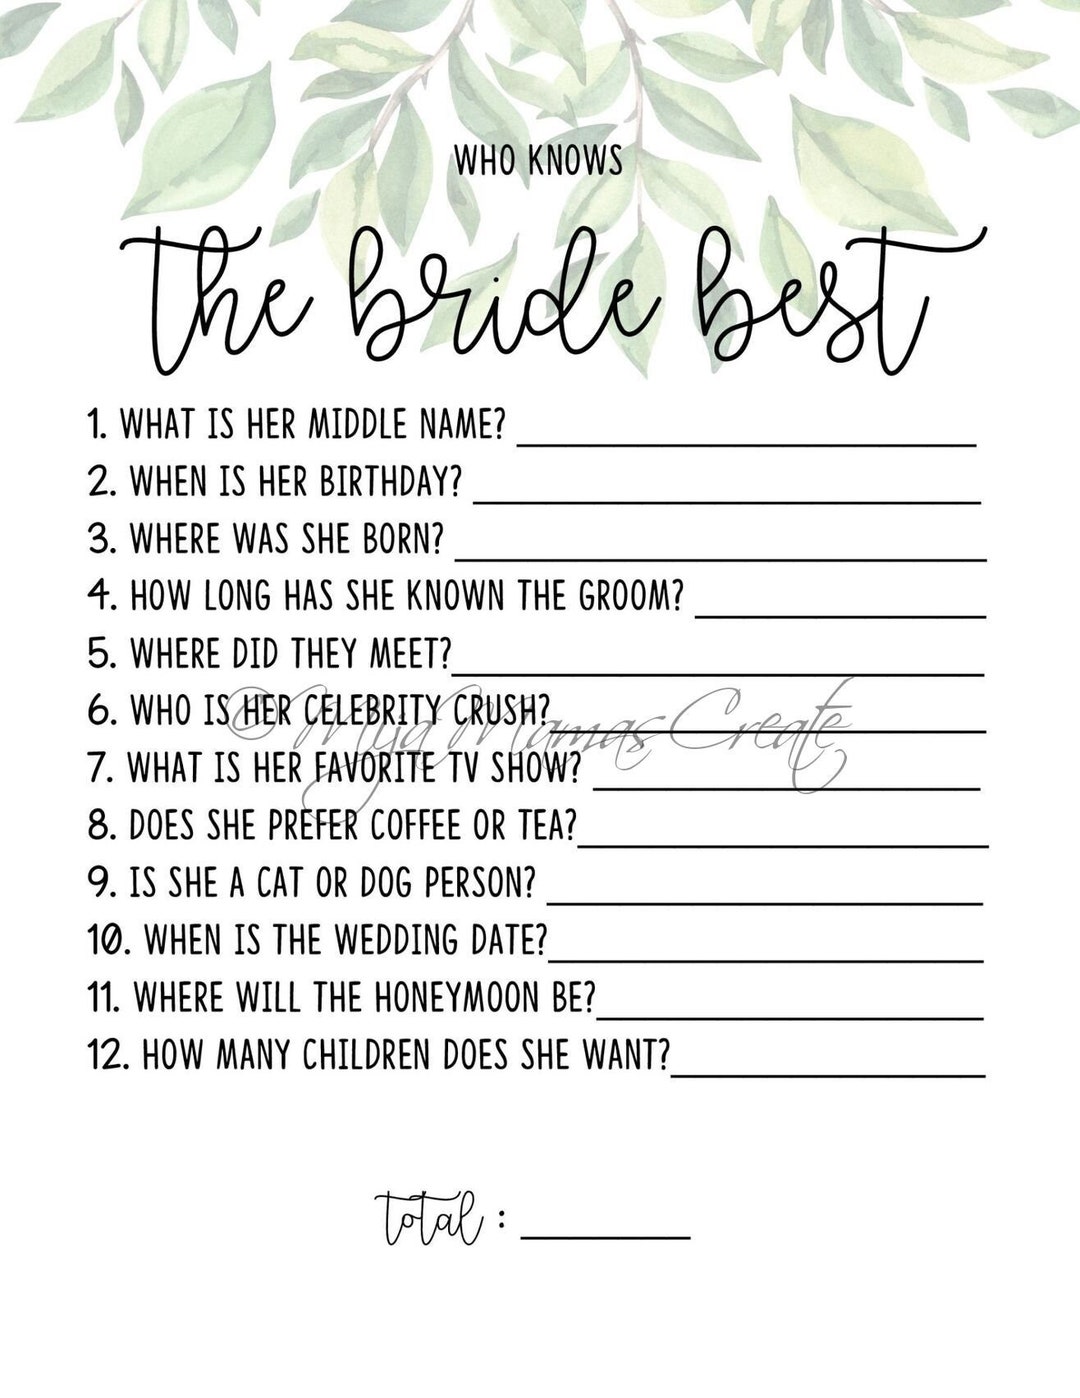 Bridal Shower Games, Who Knows the Bride, Greenery Theme - Etsy